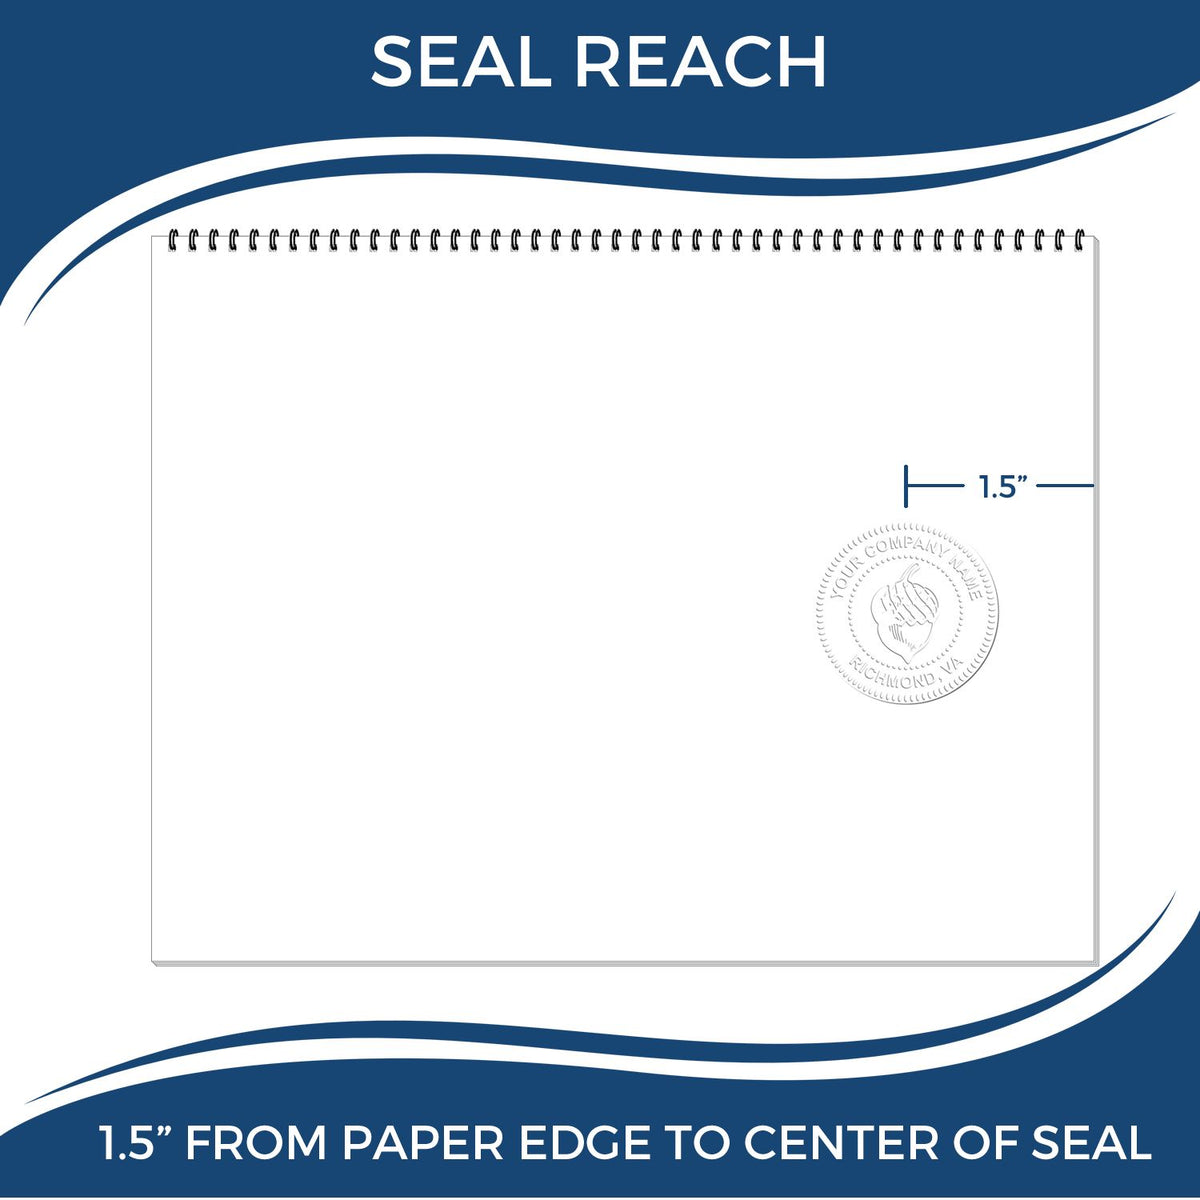 An infographic showing the seal reach which is represented by a ruler and a miniature seal image of the Hybrid Kansas Architect Seal